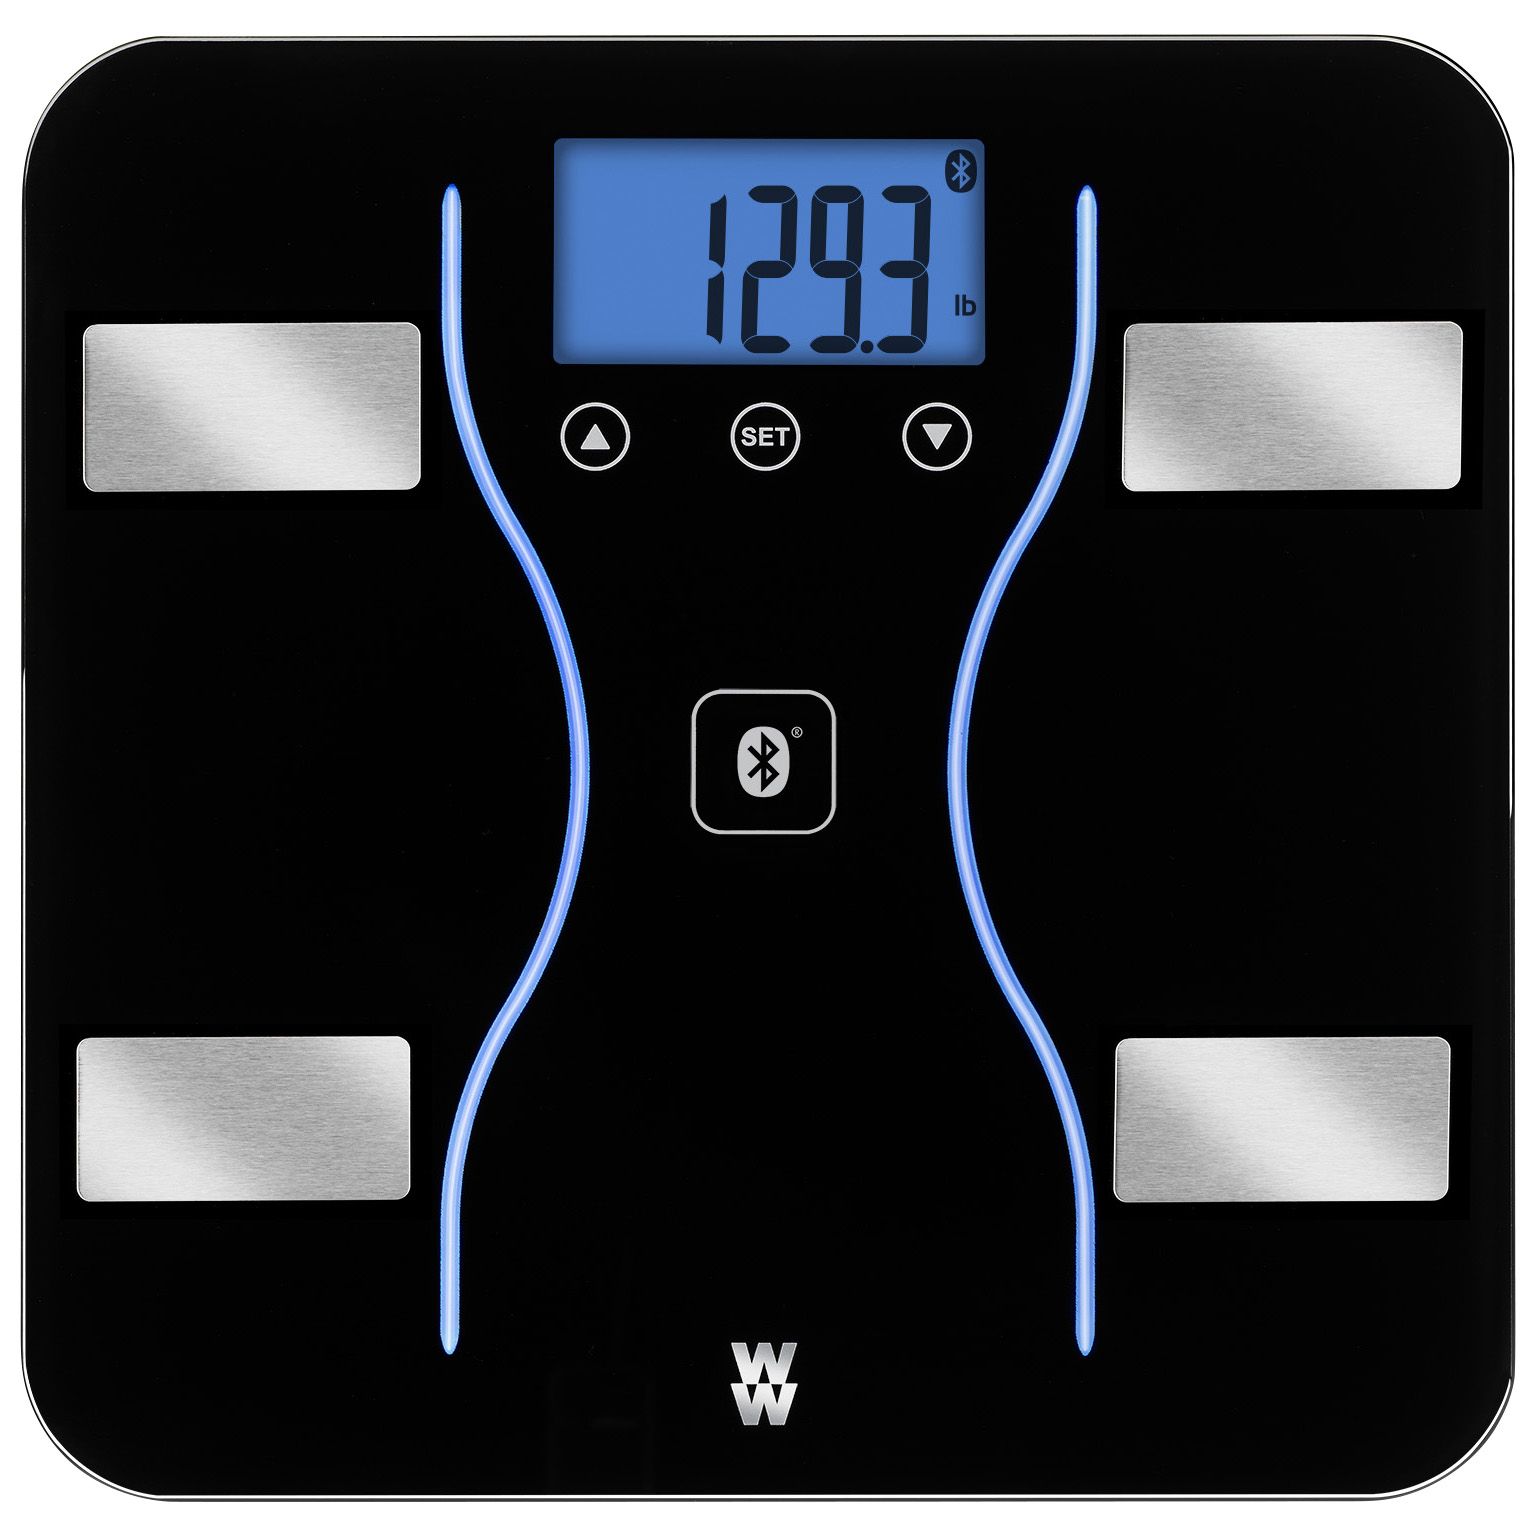 Buy WeightWatchers Extra Wide Easy Read Body Analyser Scale